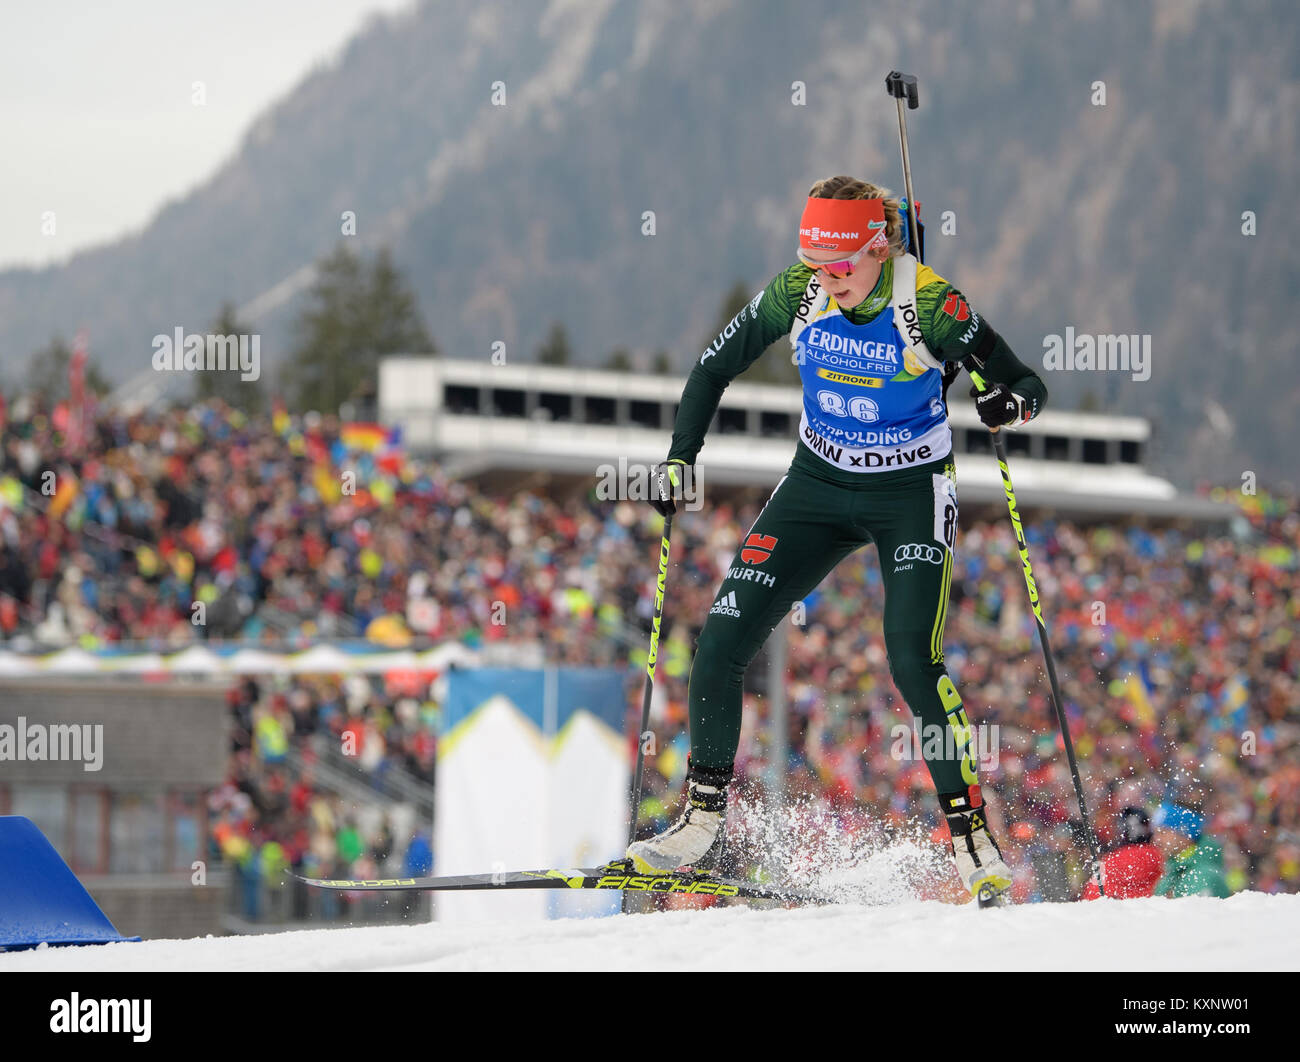 Ruhpolding, Germany. 11th Jan, 2018. Biathlete Franziska Preuss from Germany skis during the race at Chiemgau Arena in Ruhpolding, Germany, 11 January 2018. Credit: Matthias Balk/dpa/Alamy Live News Stock Photo